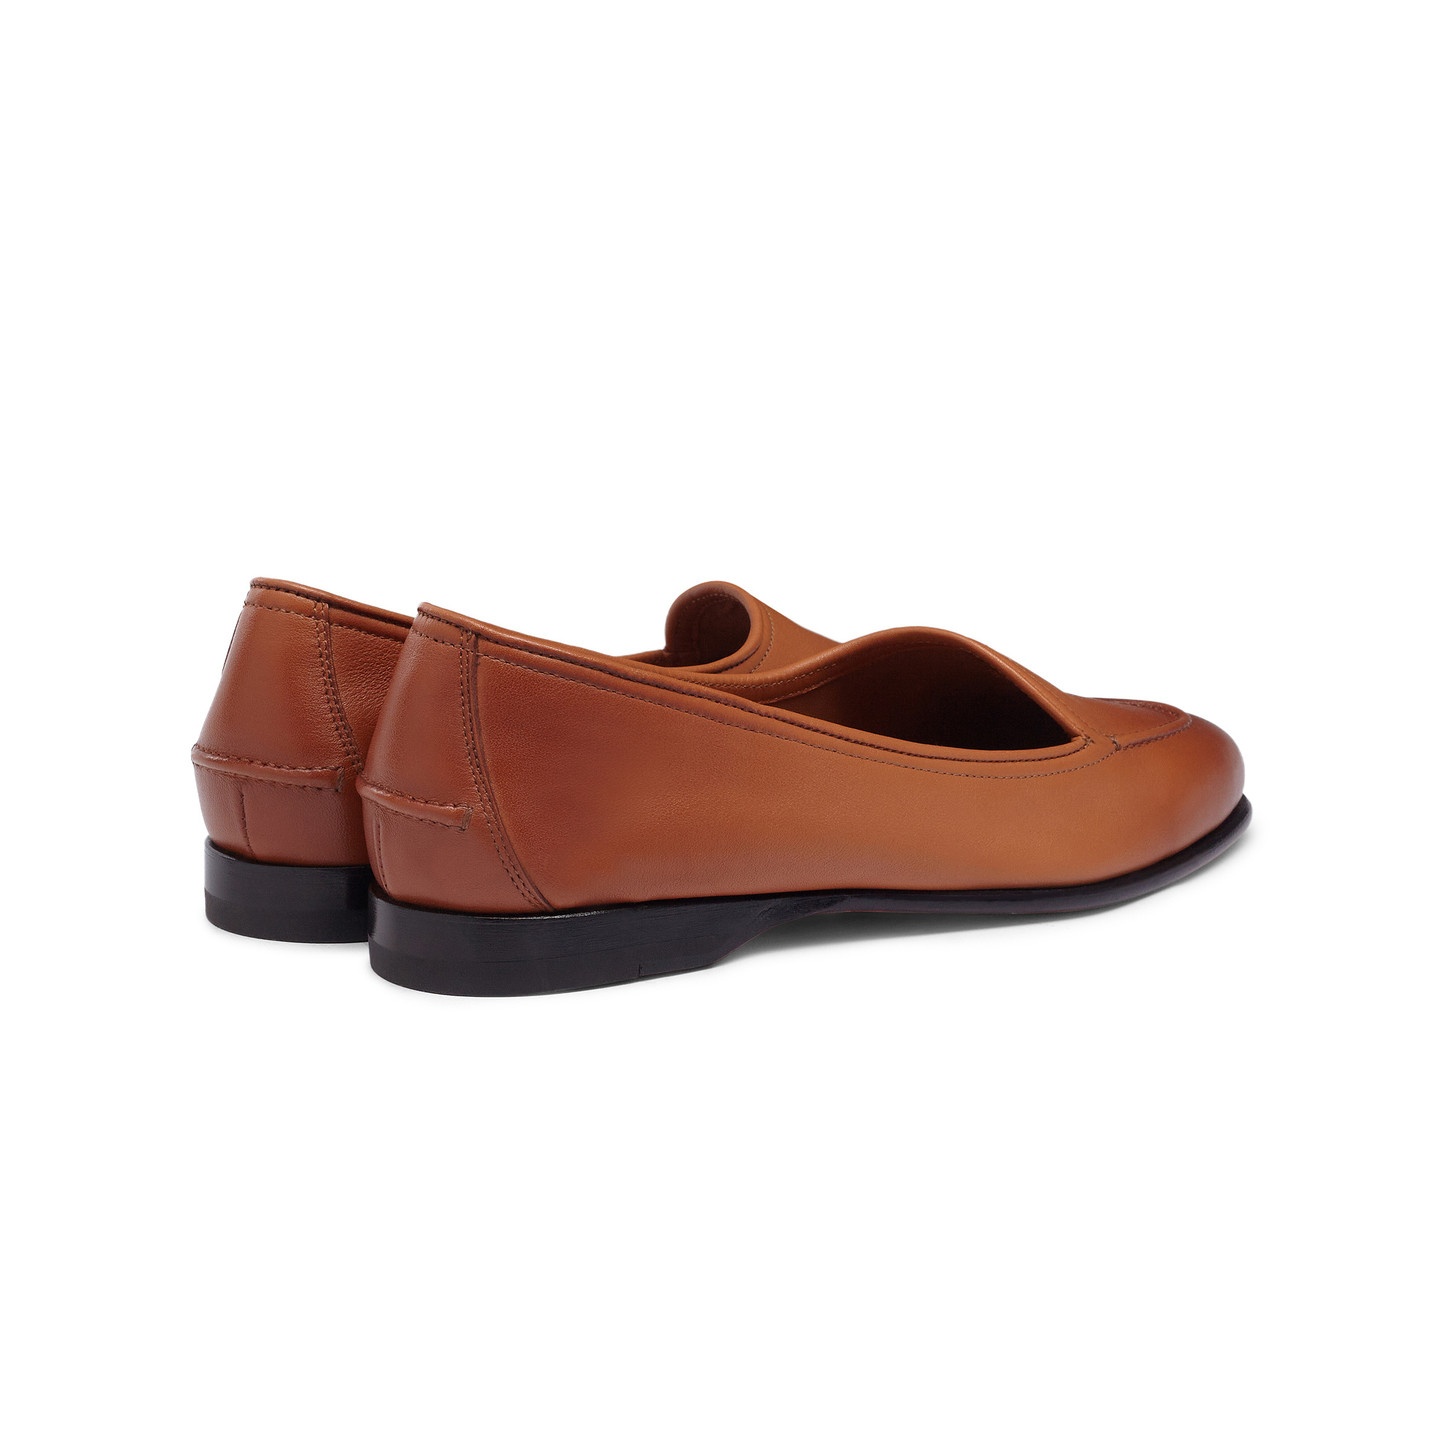 Women's brown leather Andrea loafer - 4